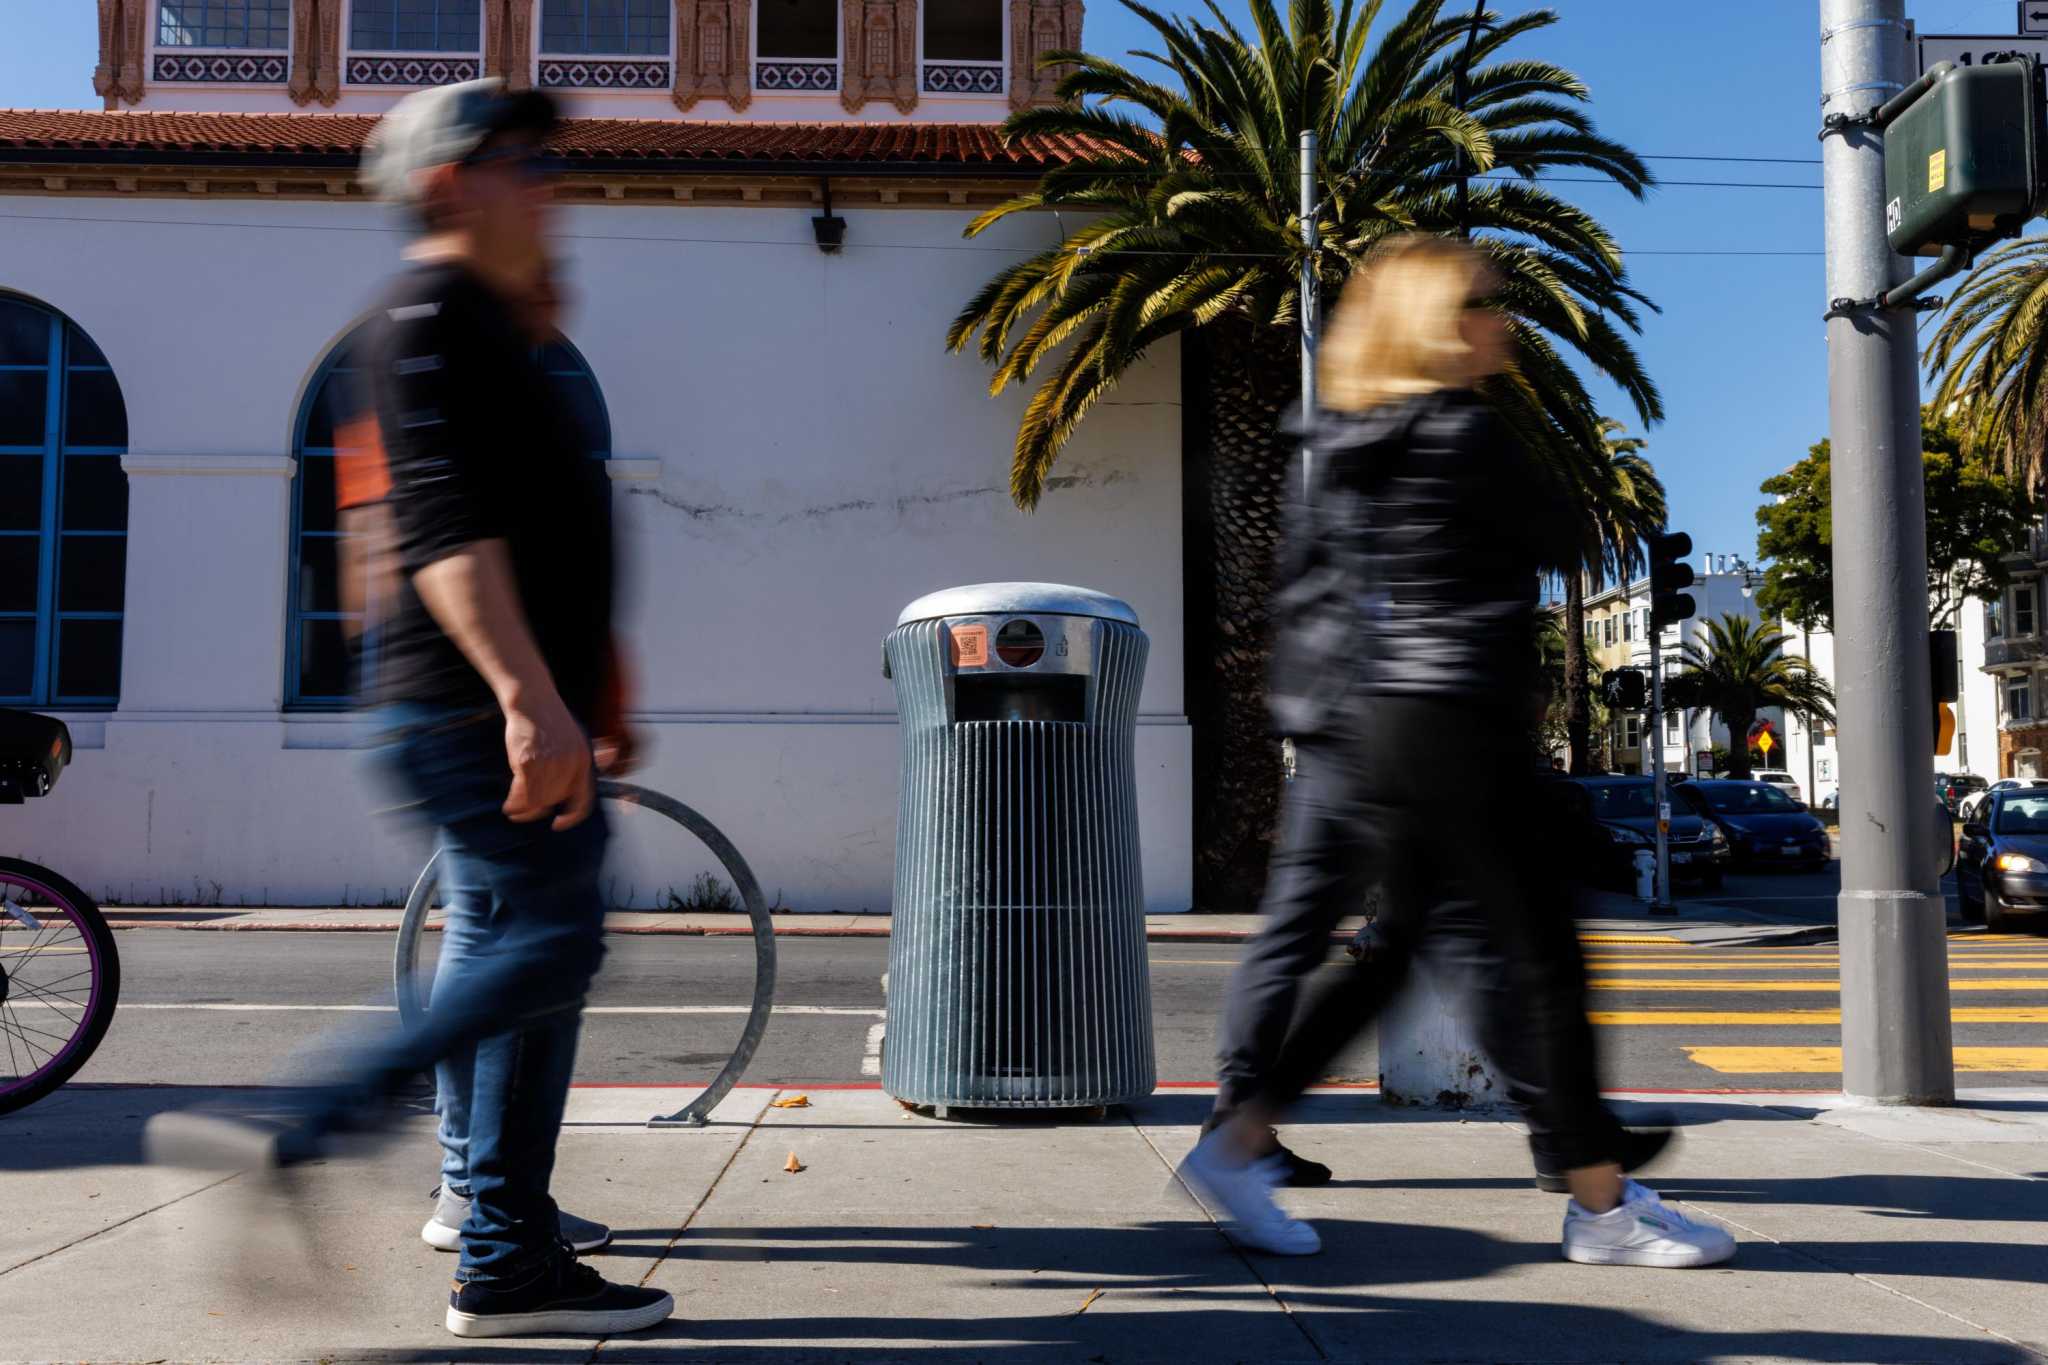 San Francisco's proposed trash cans, at $2,000 to $3,000 a pop